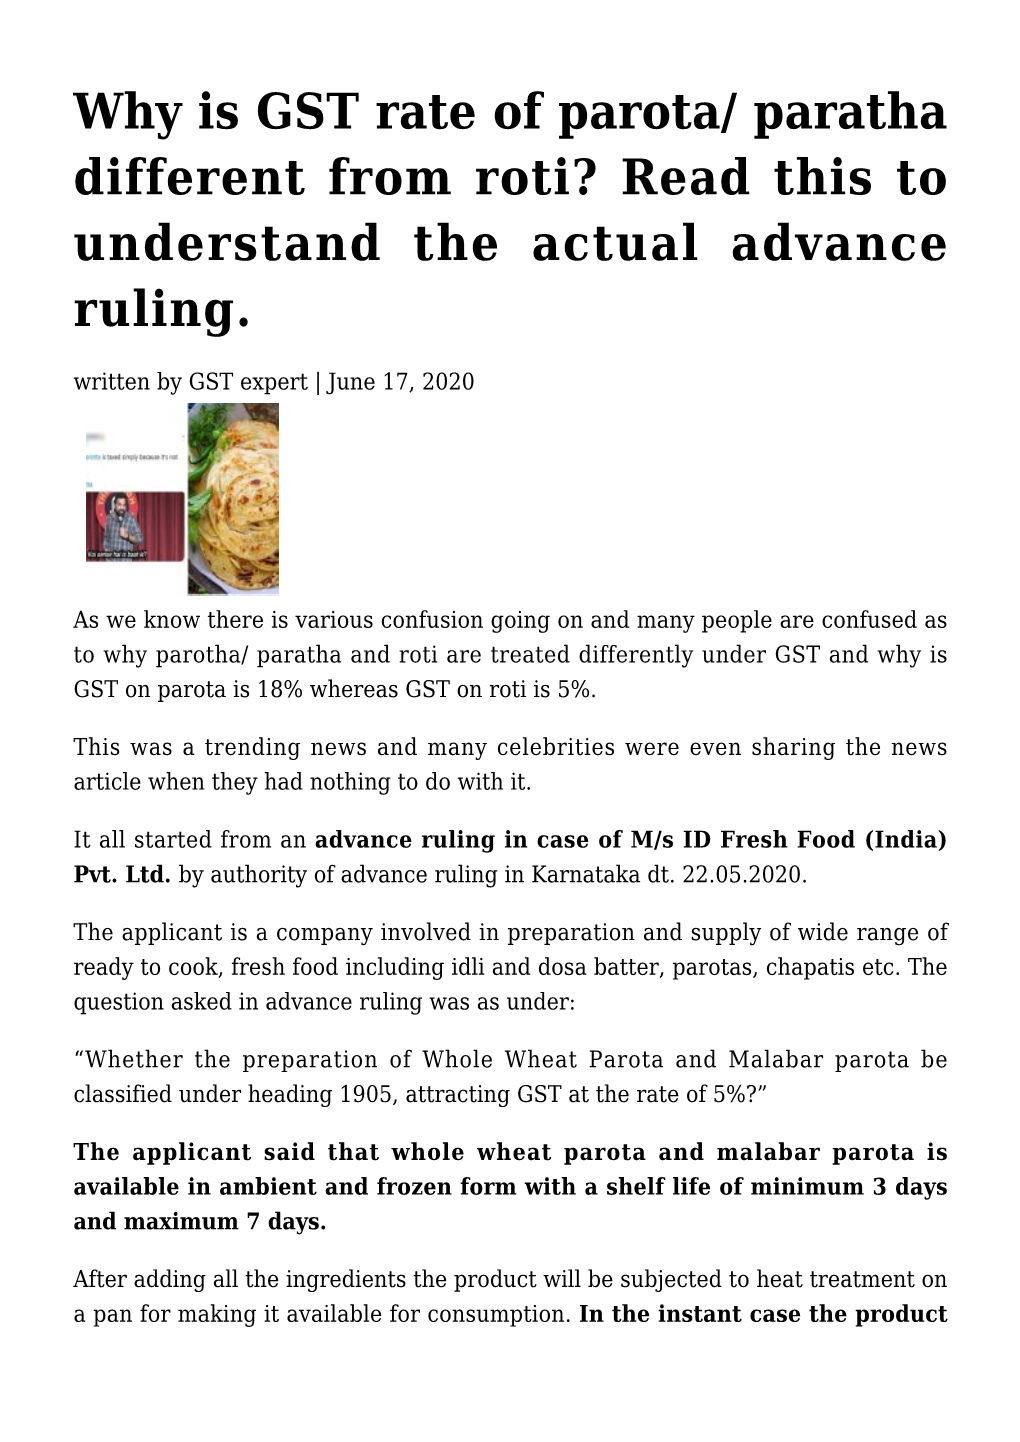 Why Is GST Rate of Parota/ Paratha Different from Roti? Read This to Understand the Actual Advance Ruling